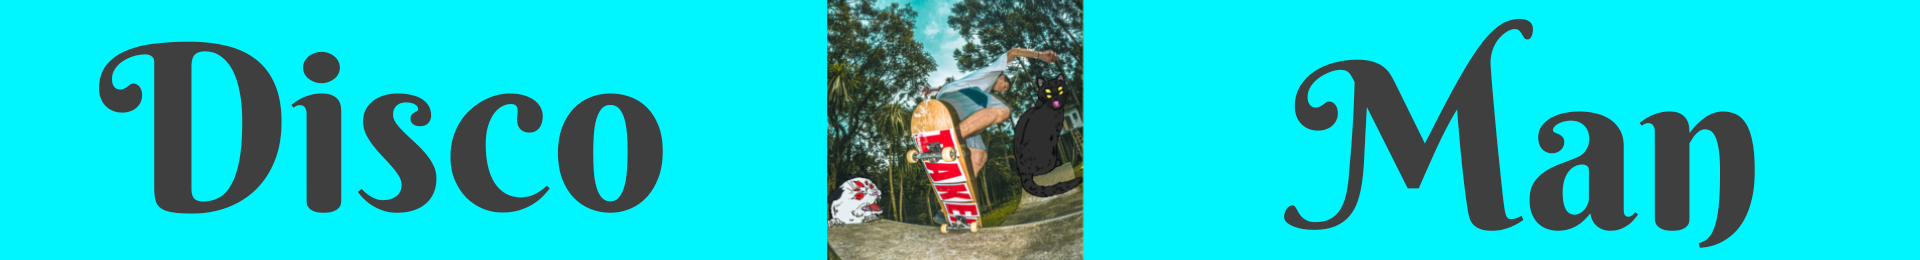 SK8 the Infinity banner